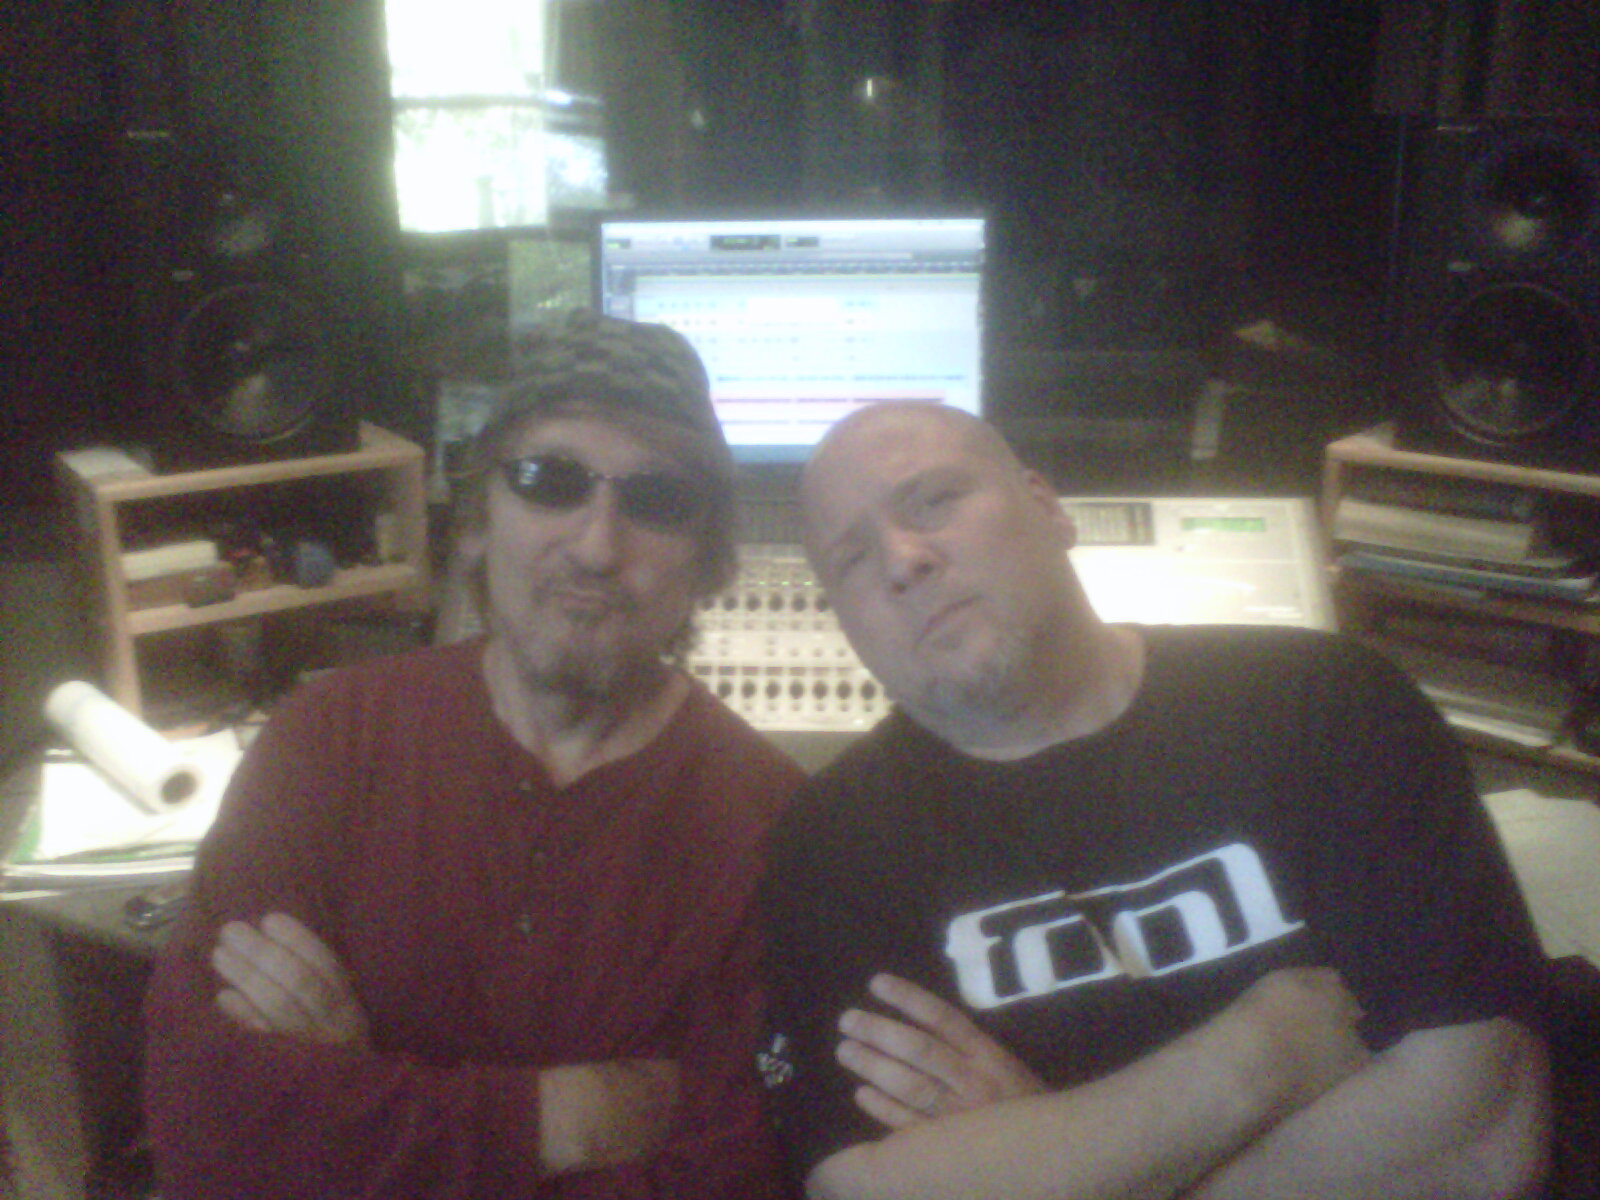 John and friend DIVINE SORROW lead singer Bryan Chappell at the recording studio for 